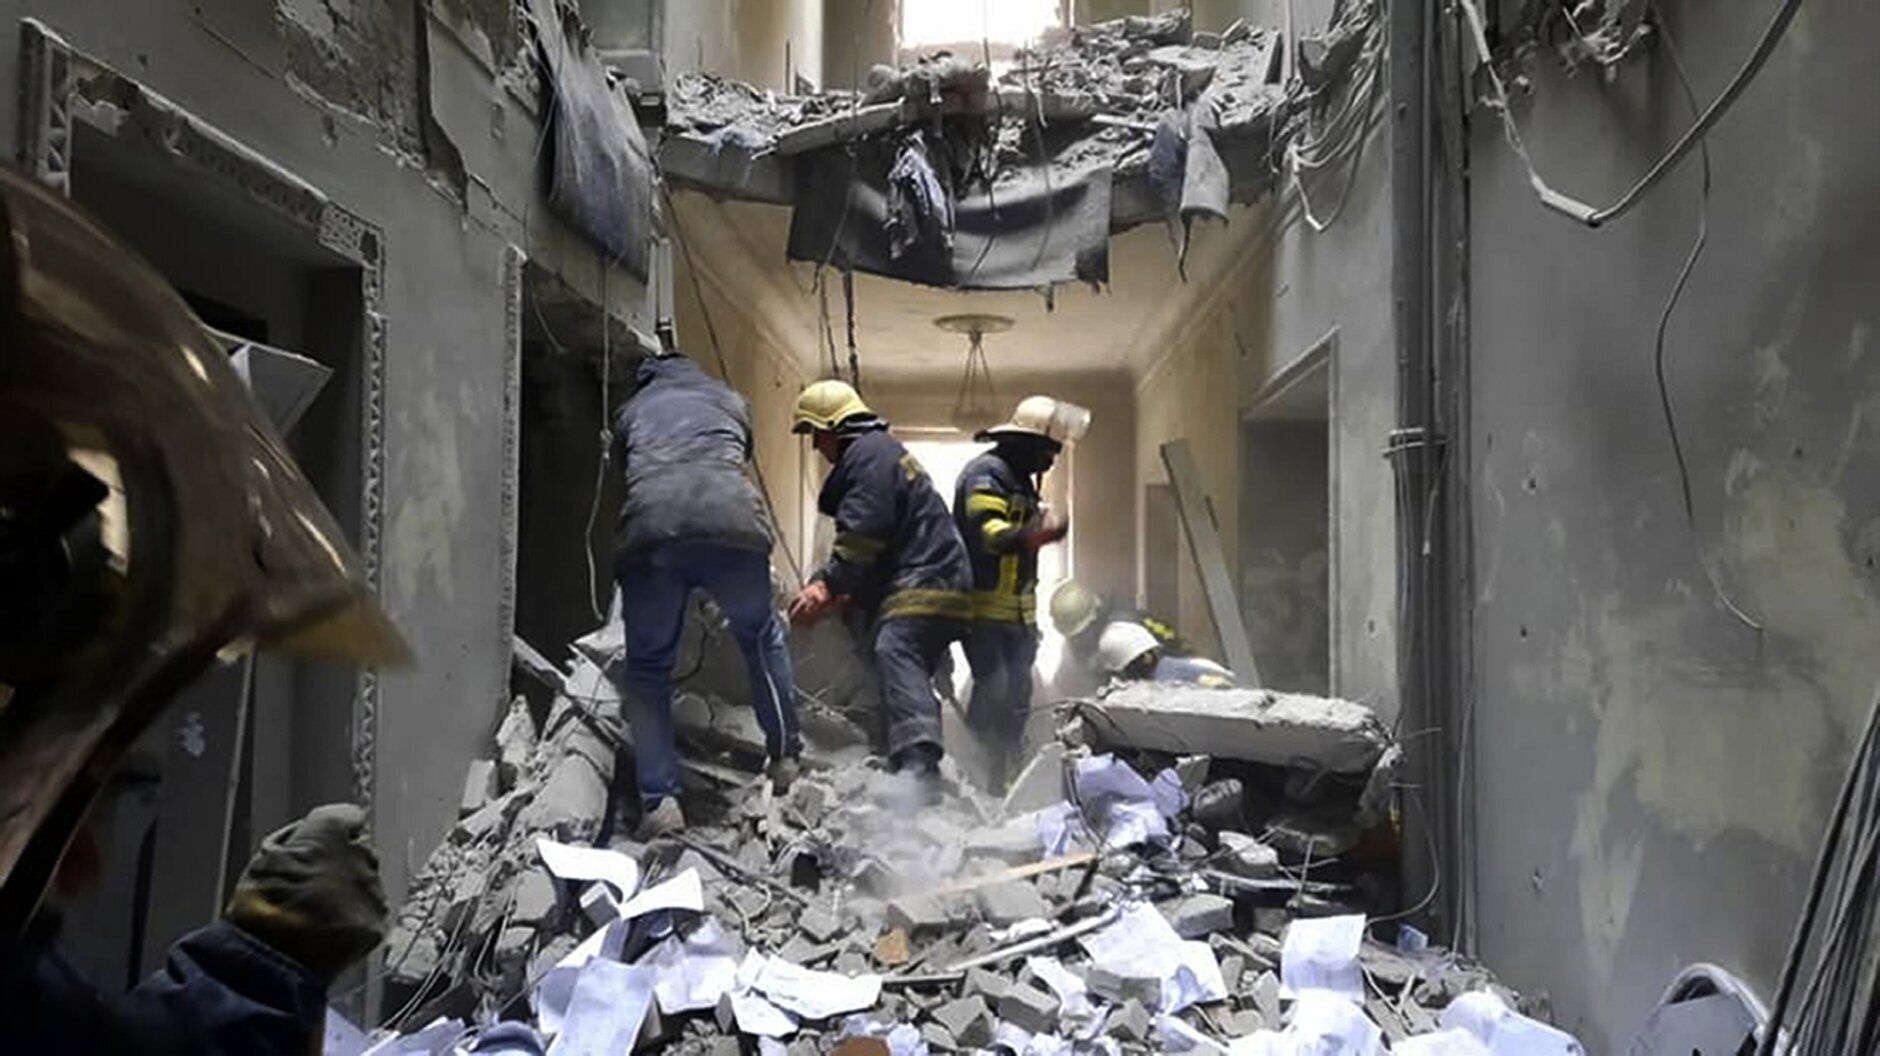 This handout photo released by Ukrainian Emergency Service shows emergency service personnel inspecting the damage inside the City Hall building in Kharkiv, Ukraine, Tuesday, March 1, 2022. Russian shelling pounded civilian targets in Ukraine's second-largest city, Kharkiv, Tuesday and a 40-mile convoy of tanks and other vehicles threatened the capital — tactics Ukraine's embattled president said were designed to force him into concessions in Europe's largest ground war in generations. (Ukrainian Emergency Service via AP)